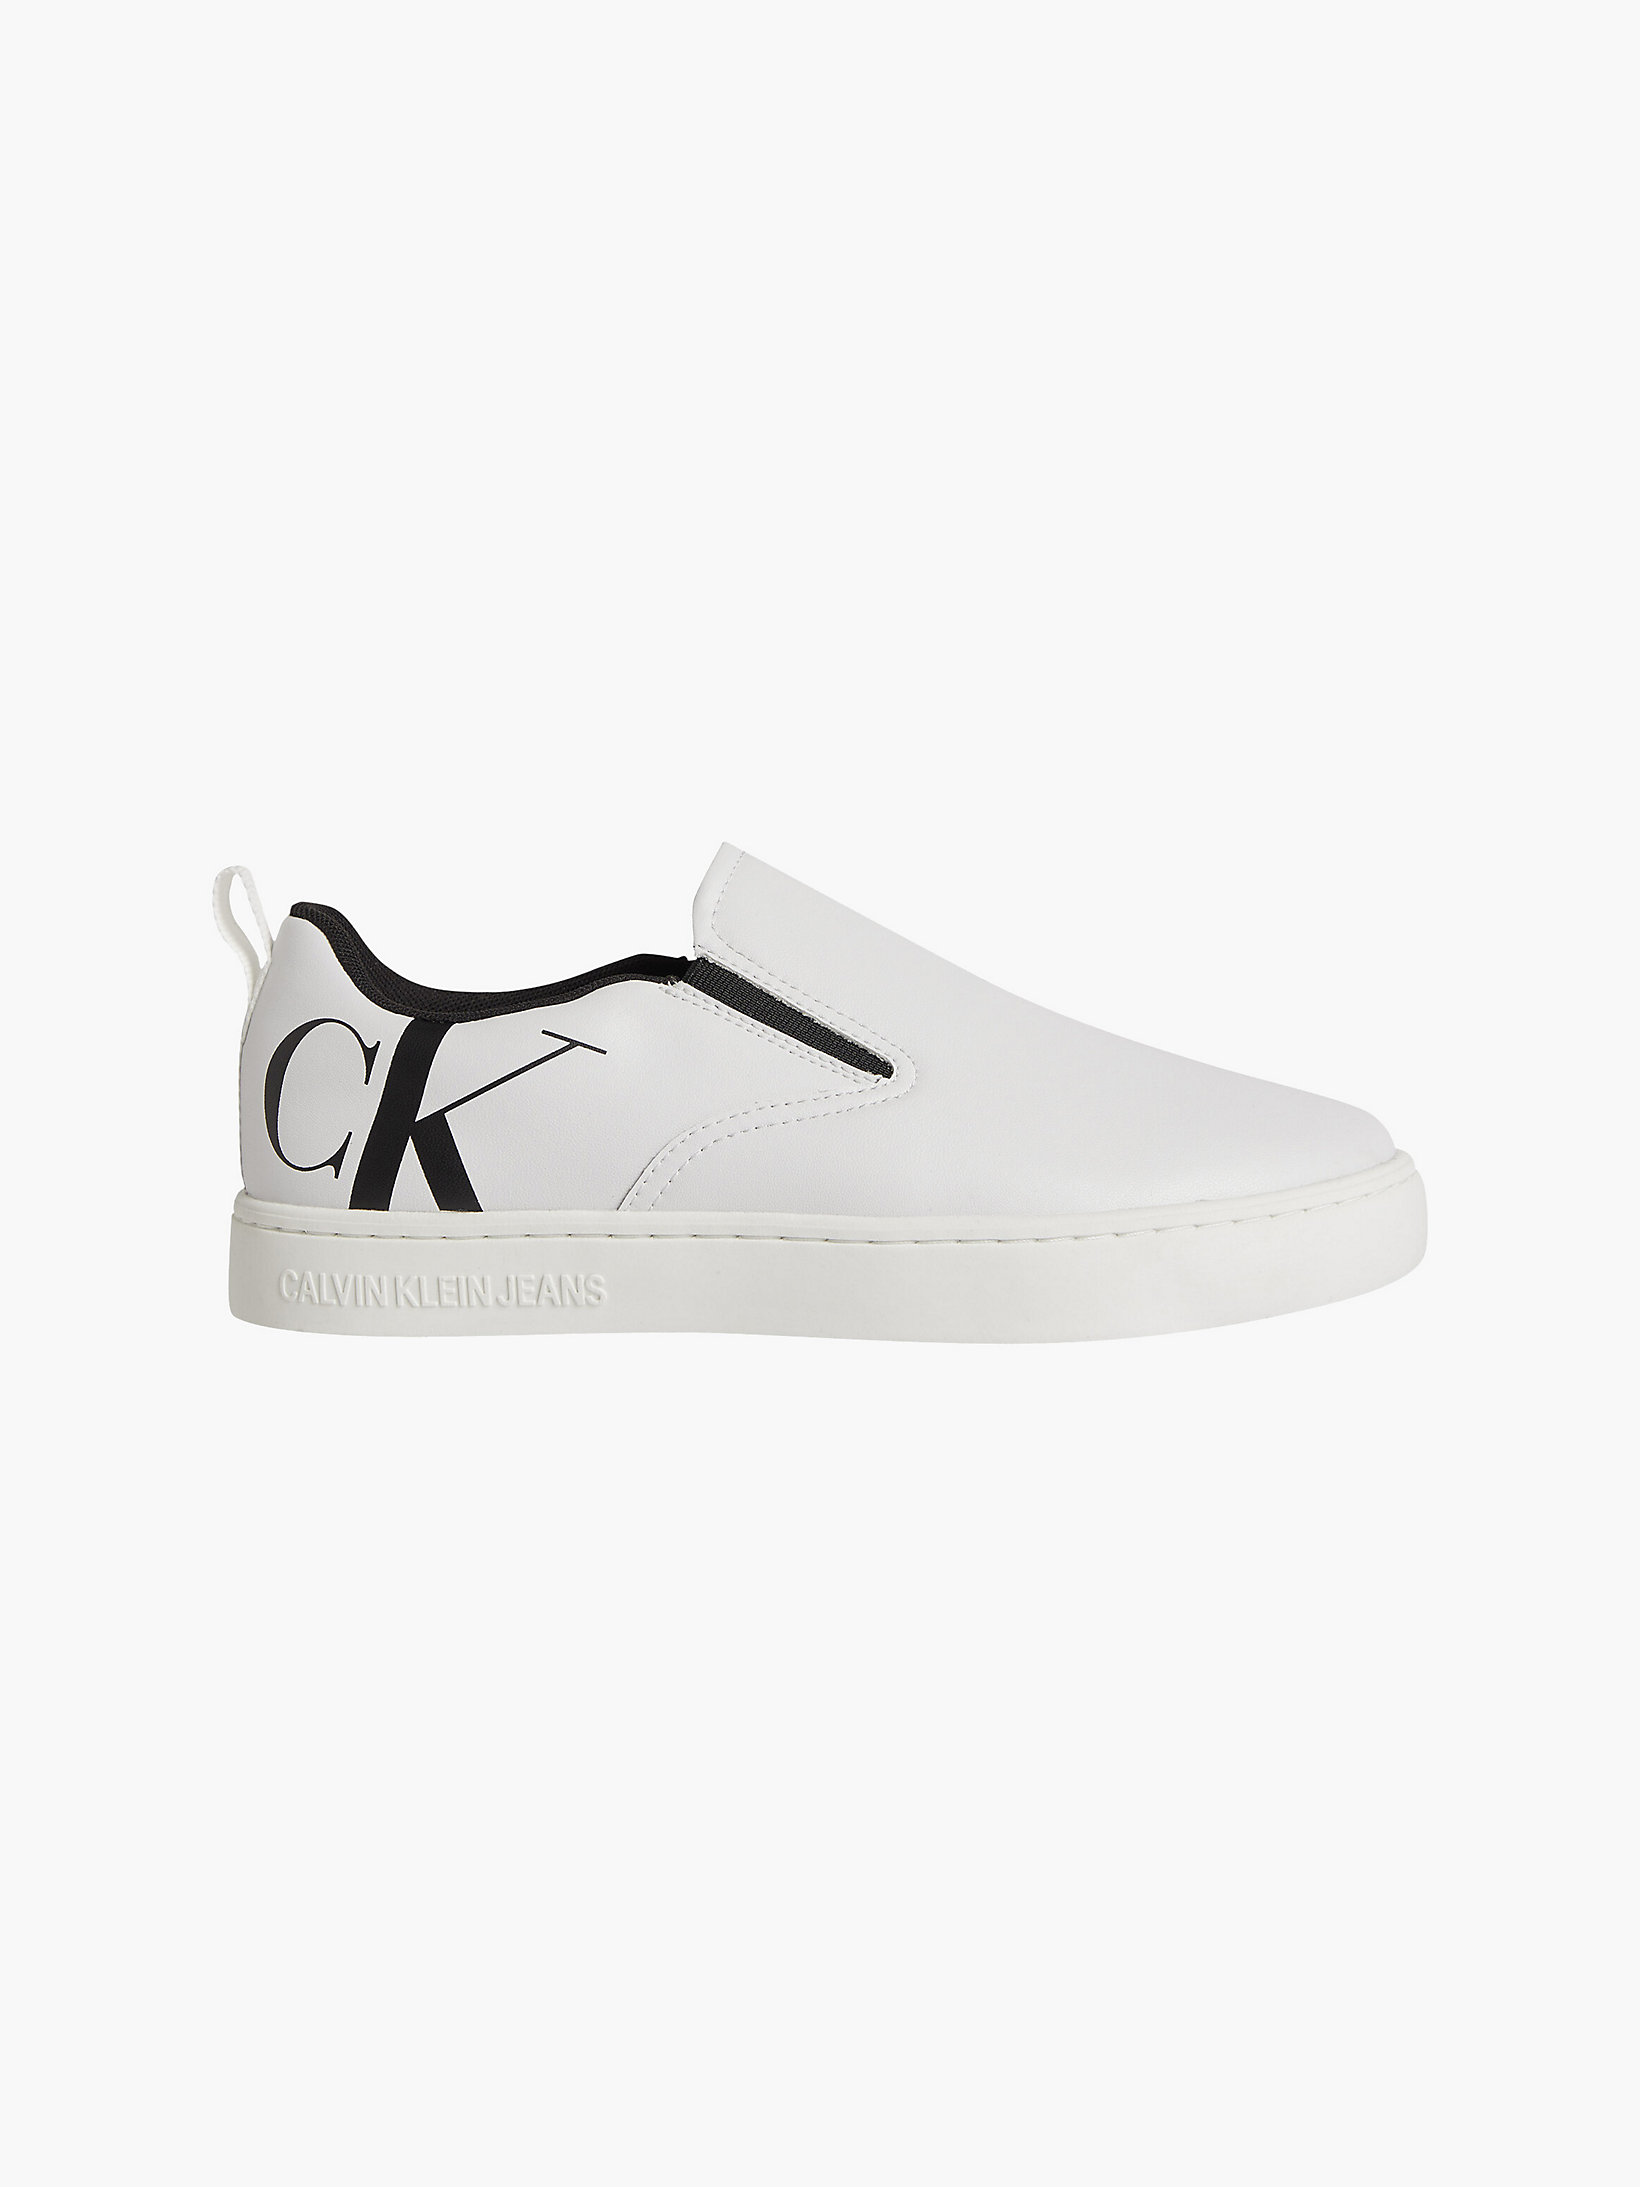 Bright White Leather Slip-On Shoes undefined men Calvin Klein